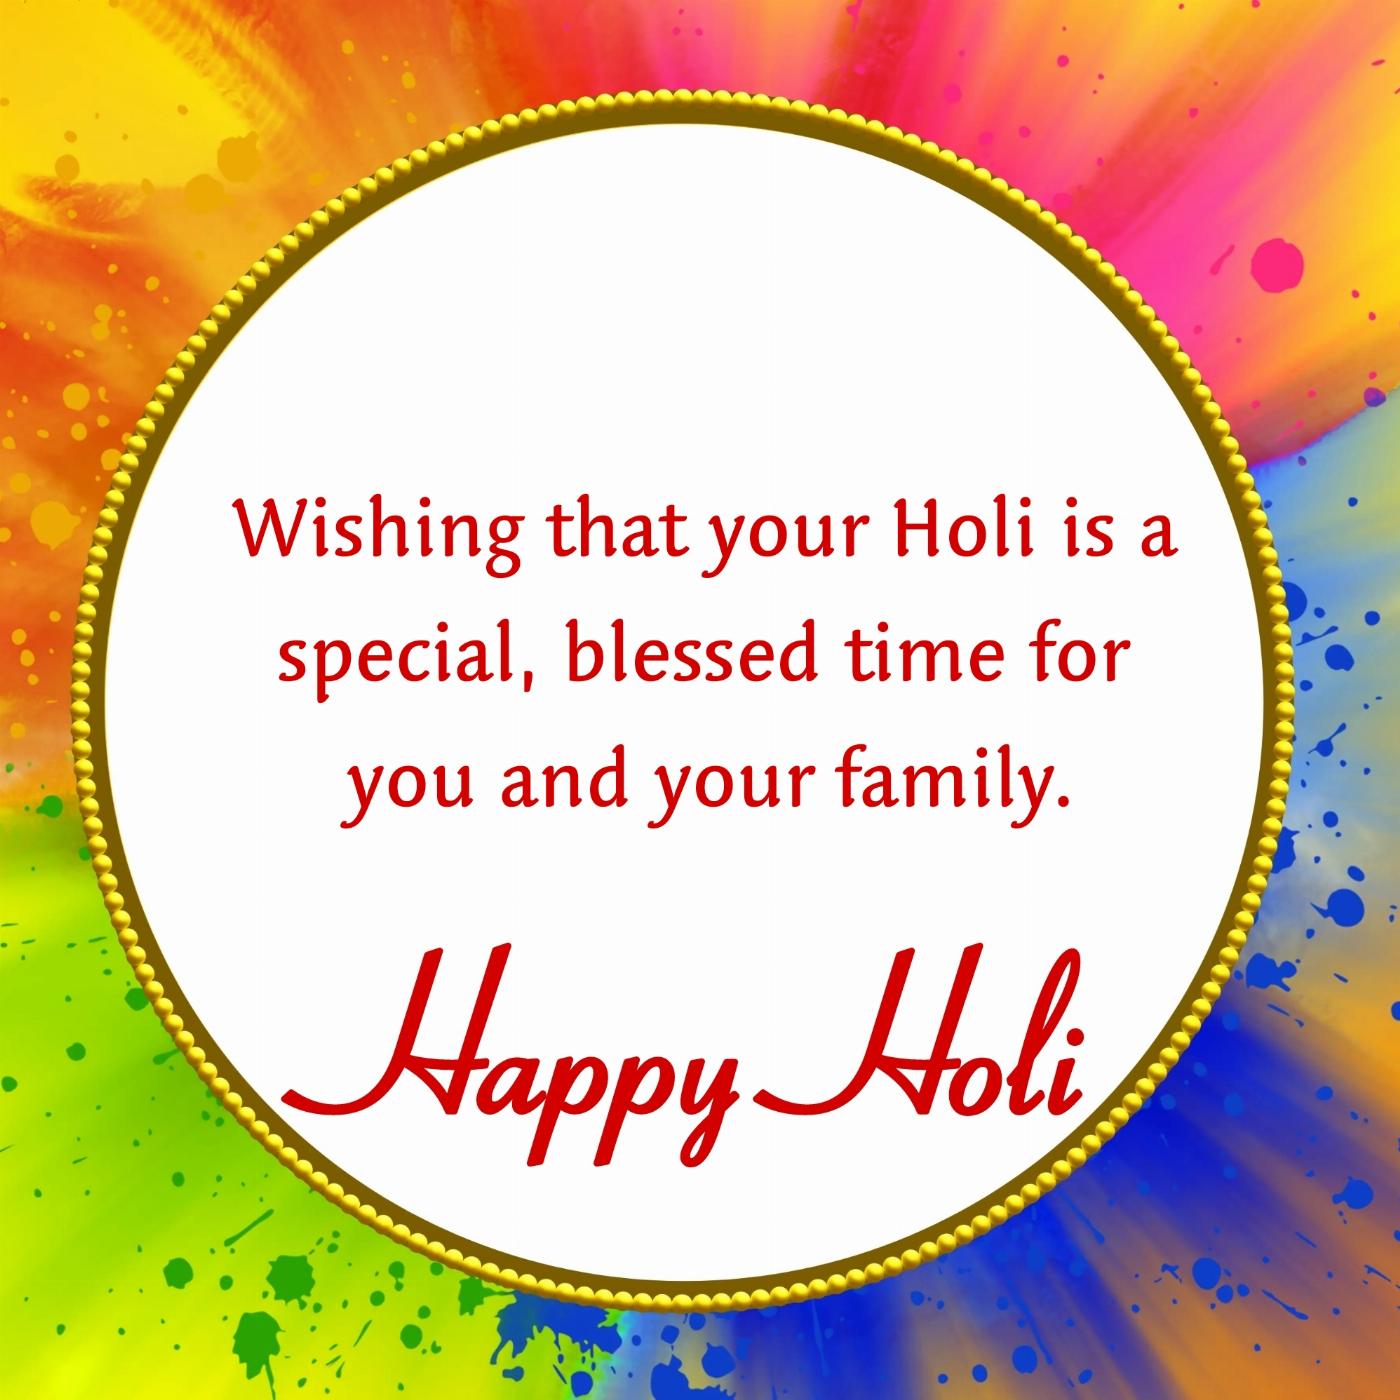 Wishing that your Holi is a special blessed time for you and your family